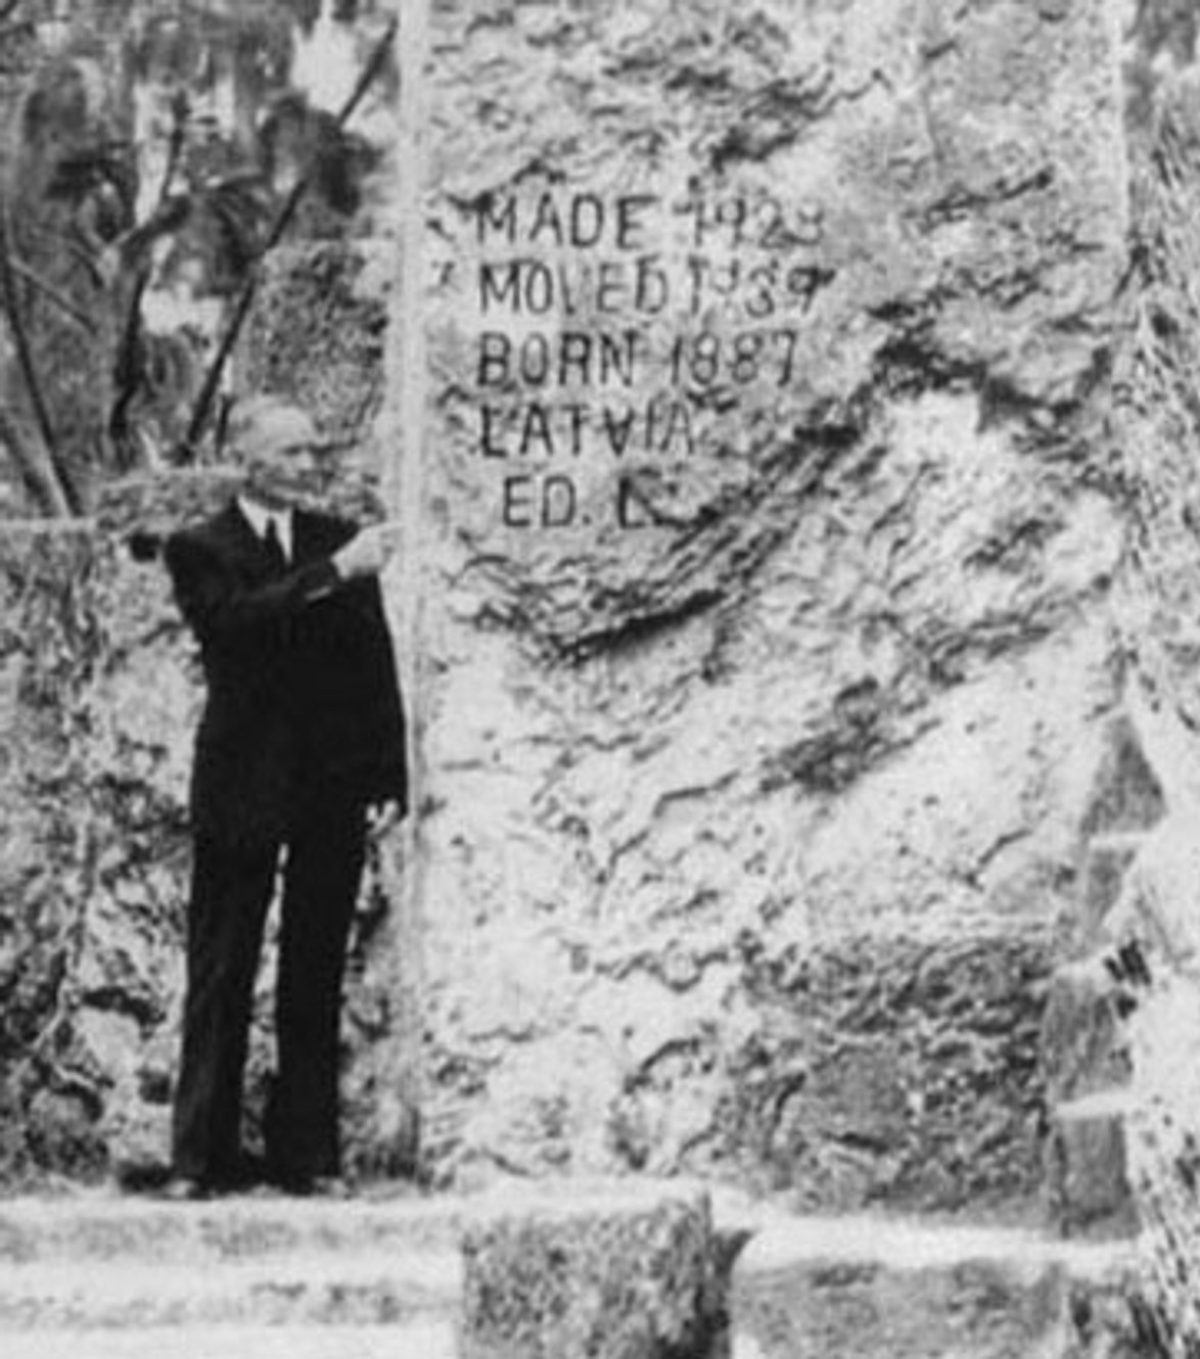 Edward Leedskalnin poses at the 12-meter obelisk in the castle grounds. Edward's initials are carved on the obelisk, as well as the year of his birth, the year the construction began and the castle was moved.